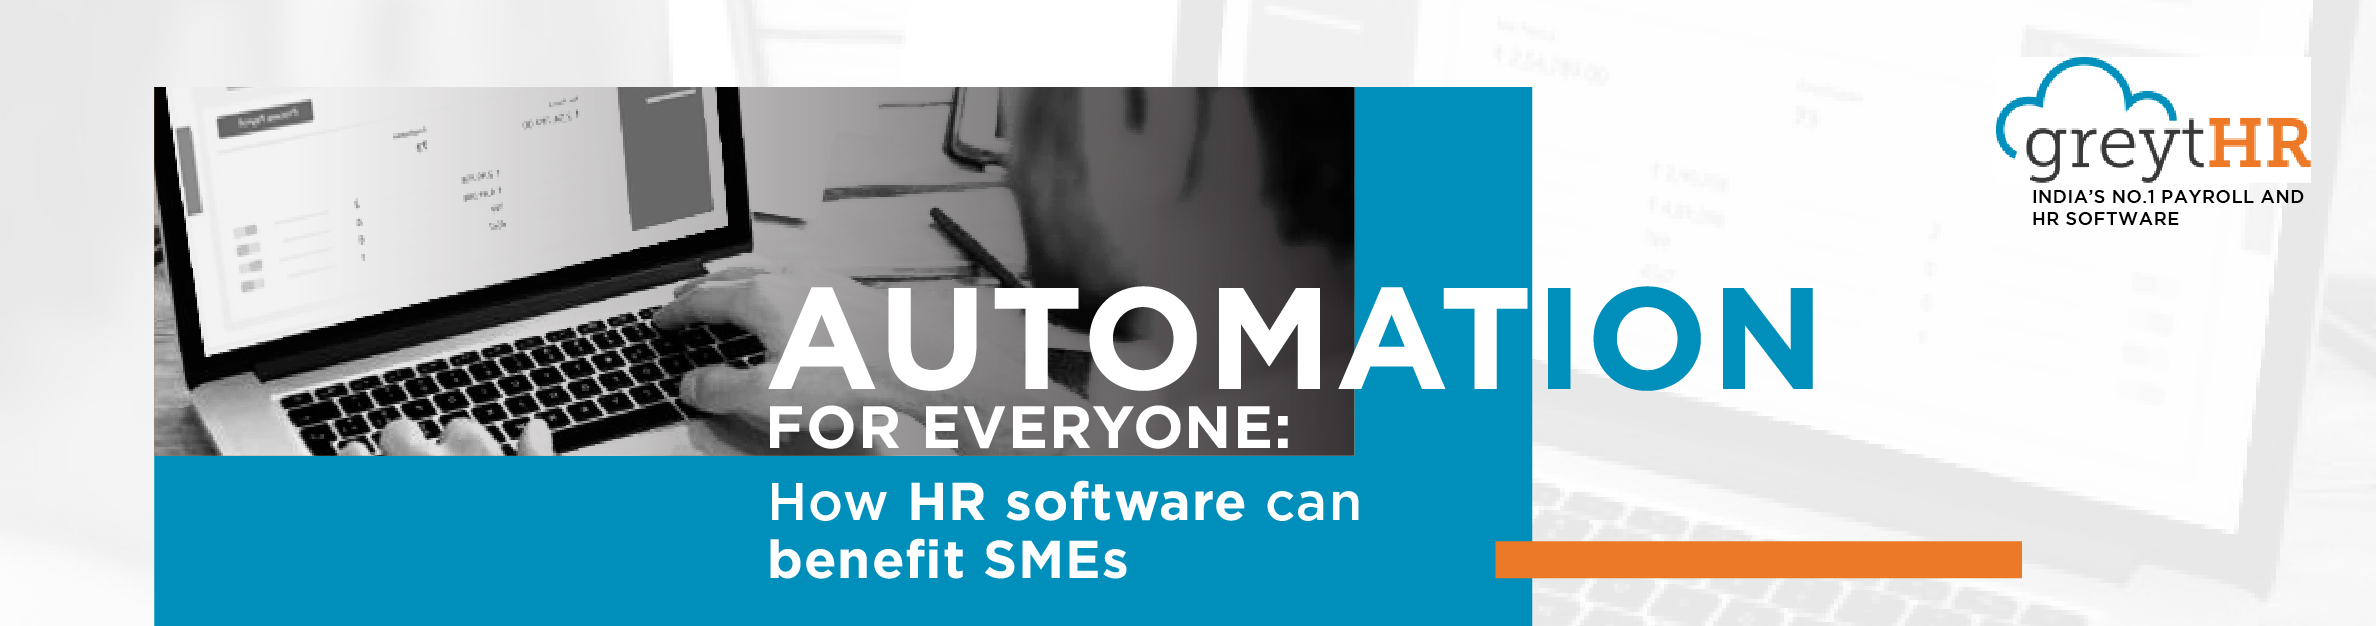 HR automation for SMEs